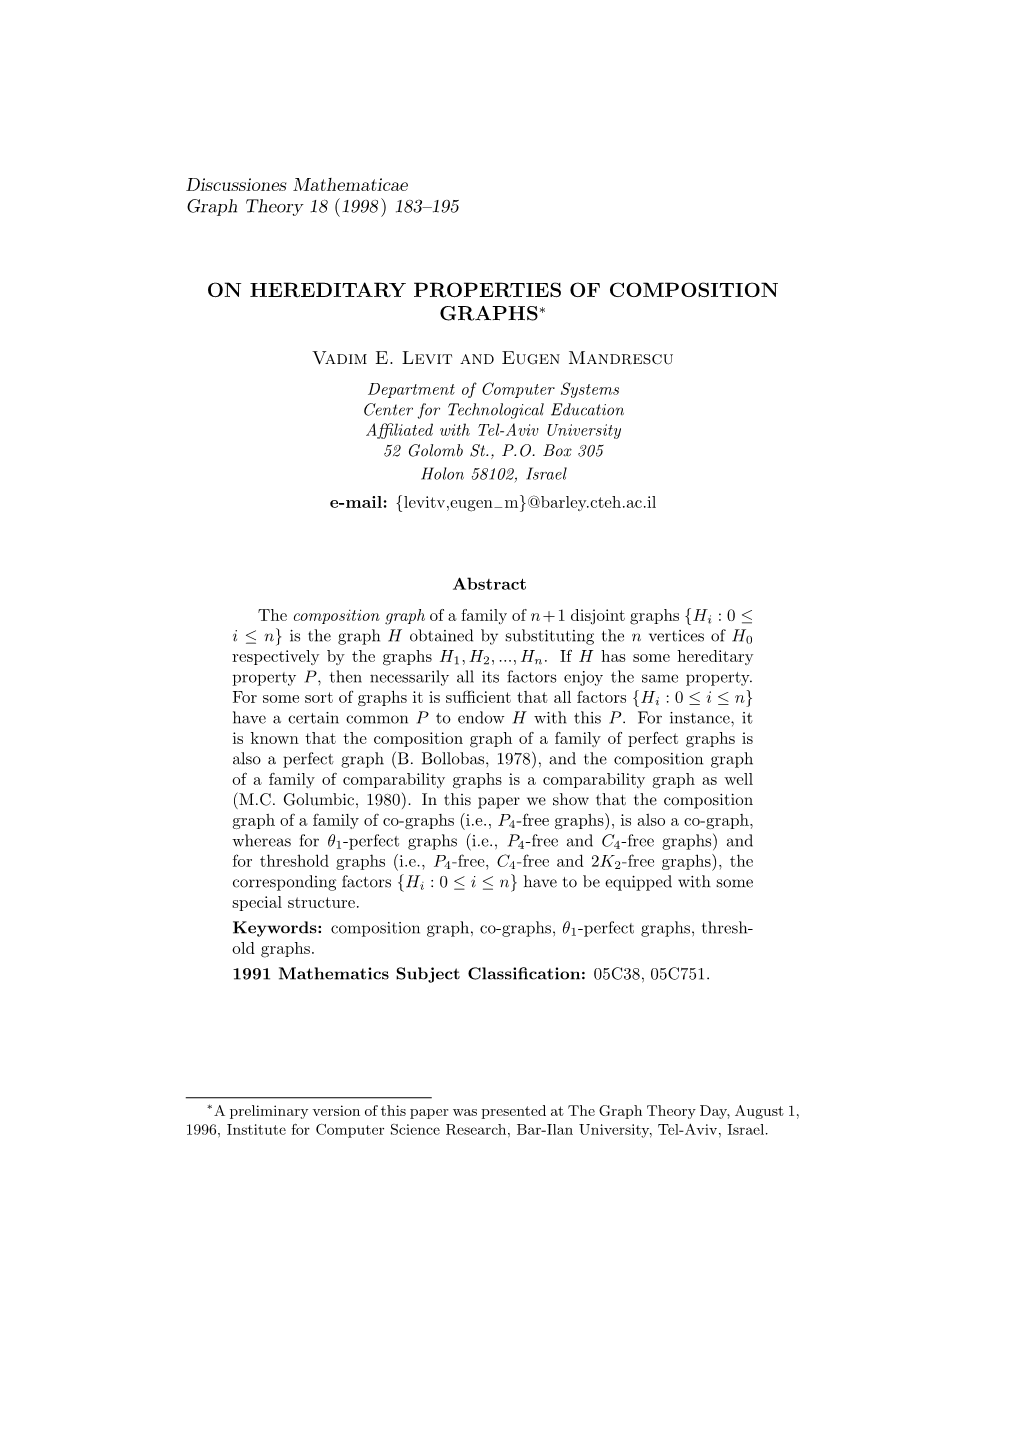 On Hereditary Properties of Composition Graphs∗